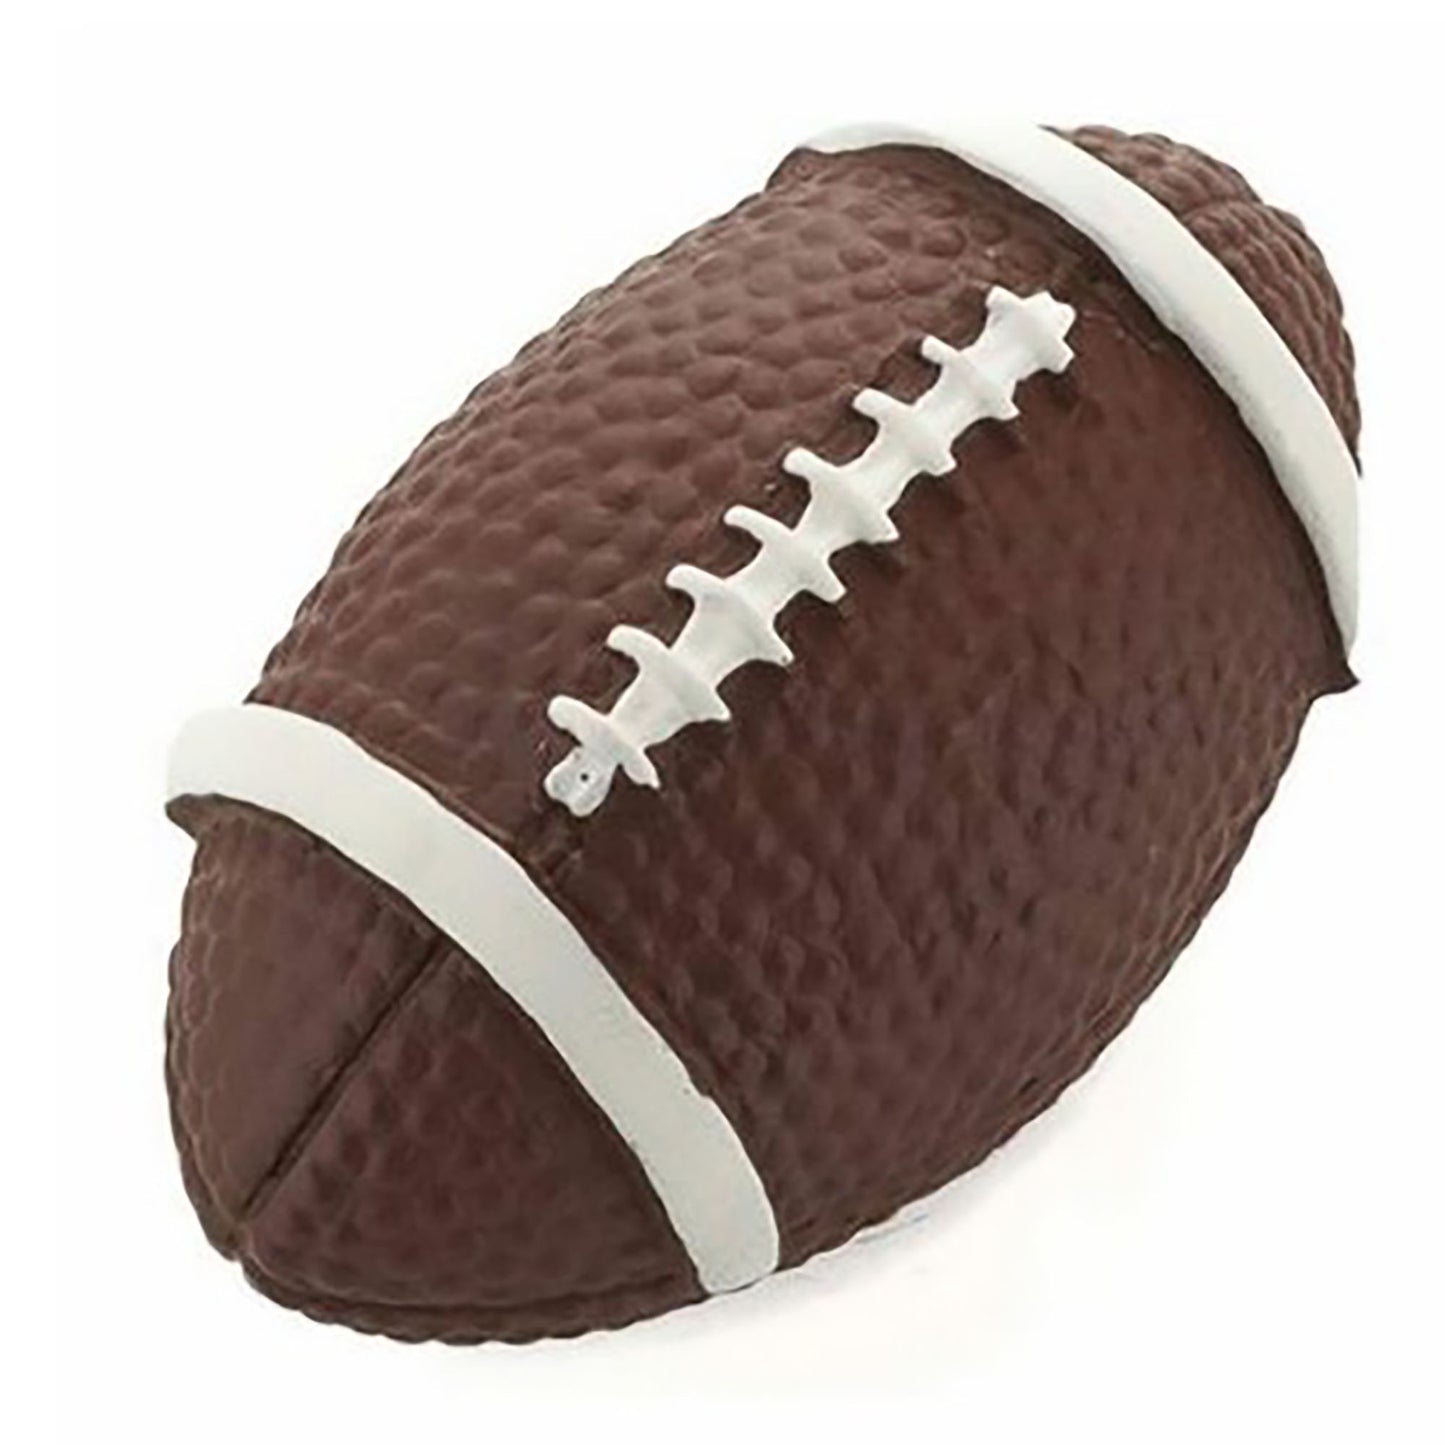 Richelieu-Eclectic-Football-Knobs_-Pulls-for-Cabinets.-Hardware-MPN-BP934800.-Chocolate-brown.-Shop-eBargainsAndDeals.com